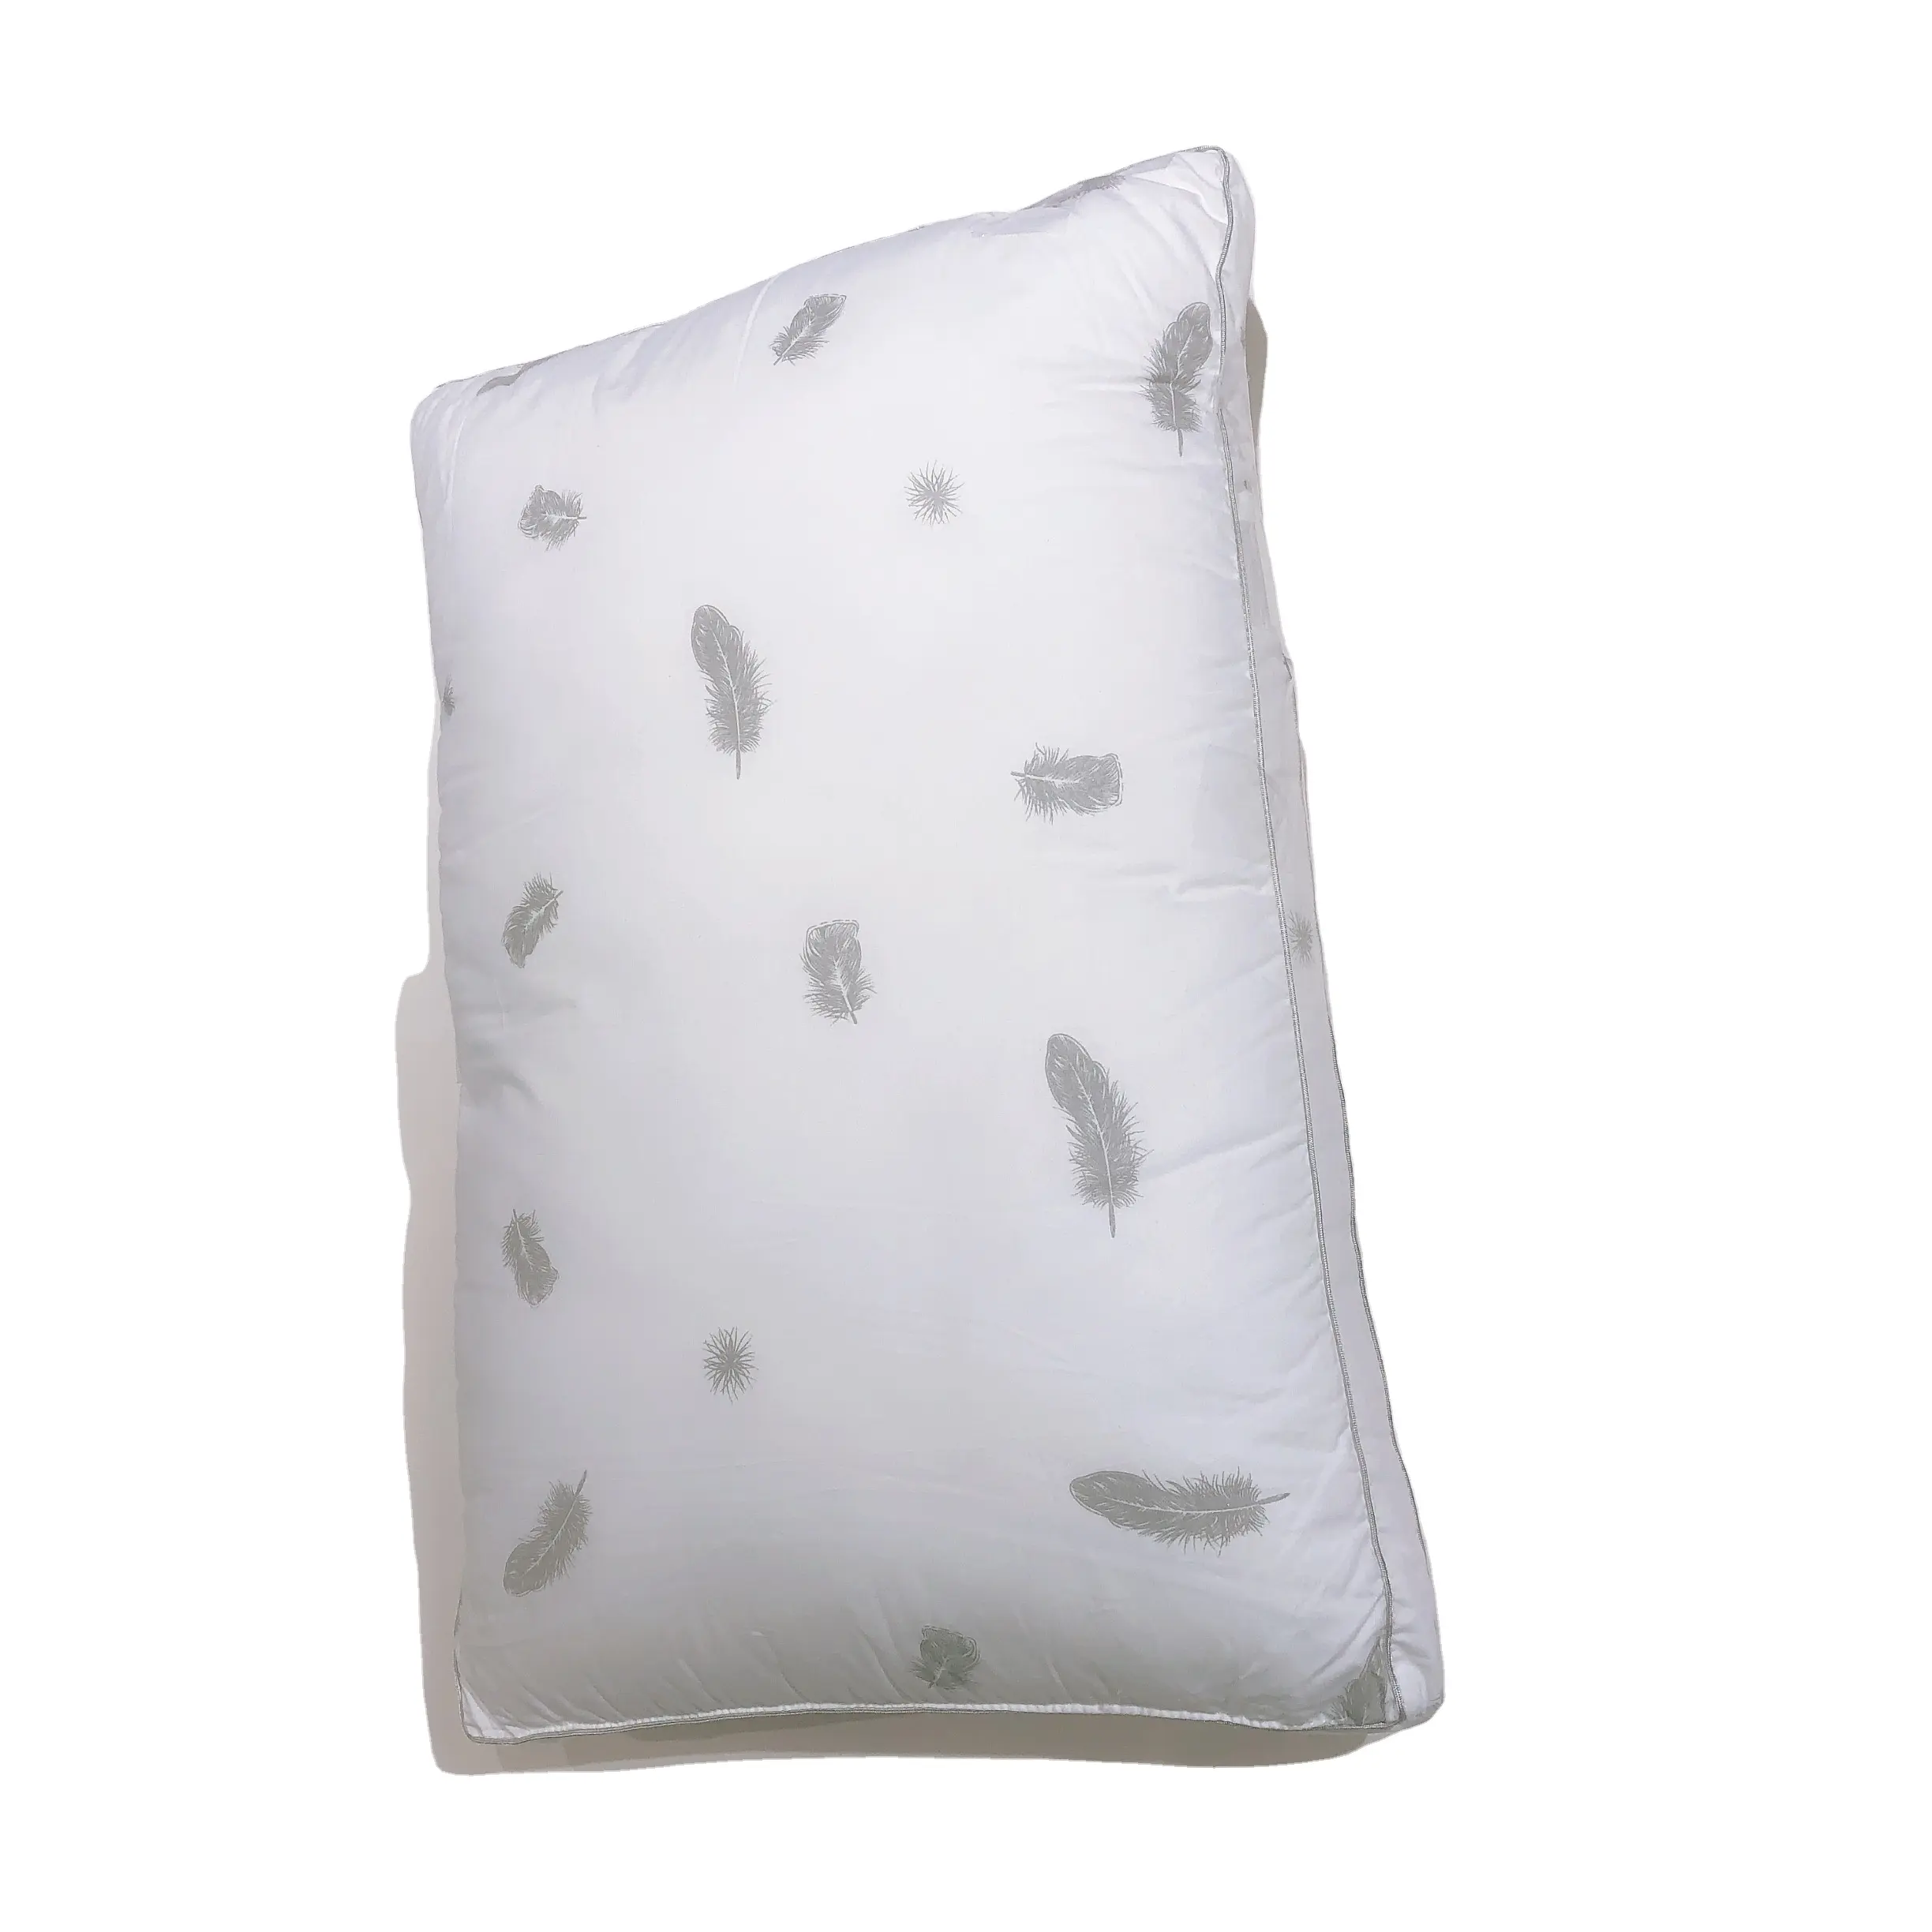 High Quality Luxury Down Alternative Microfiber Filling Sleeping Pillow Breathable 100% Cotton Shell Plush Soft